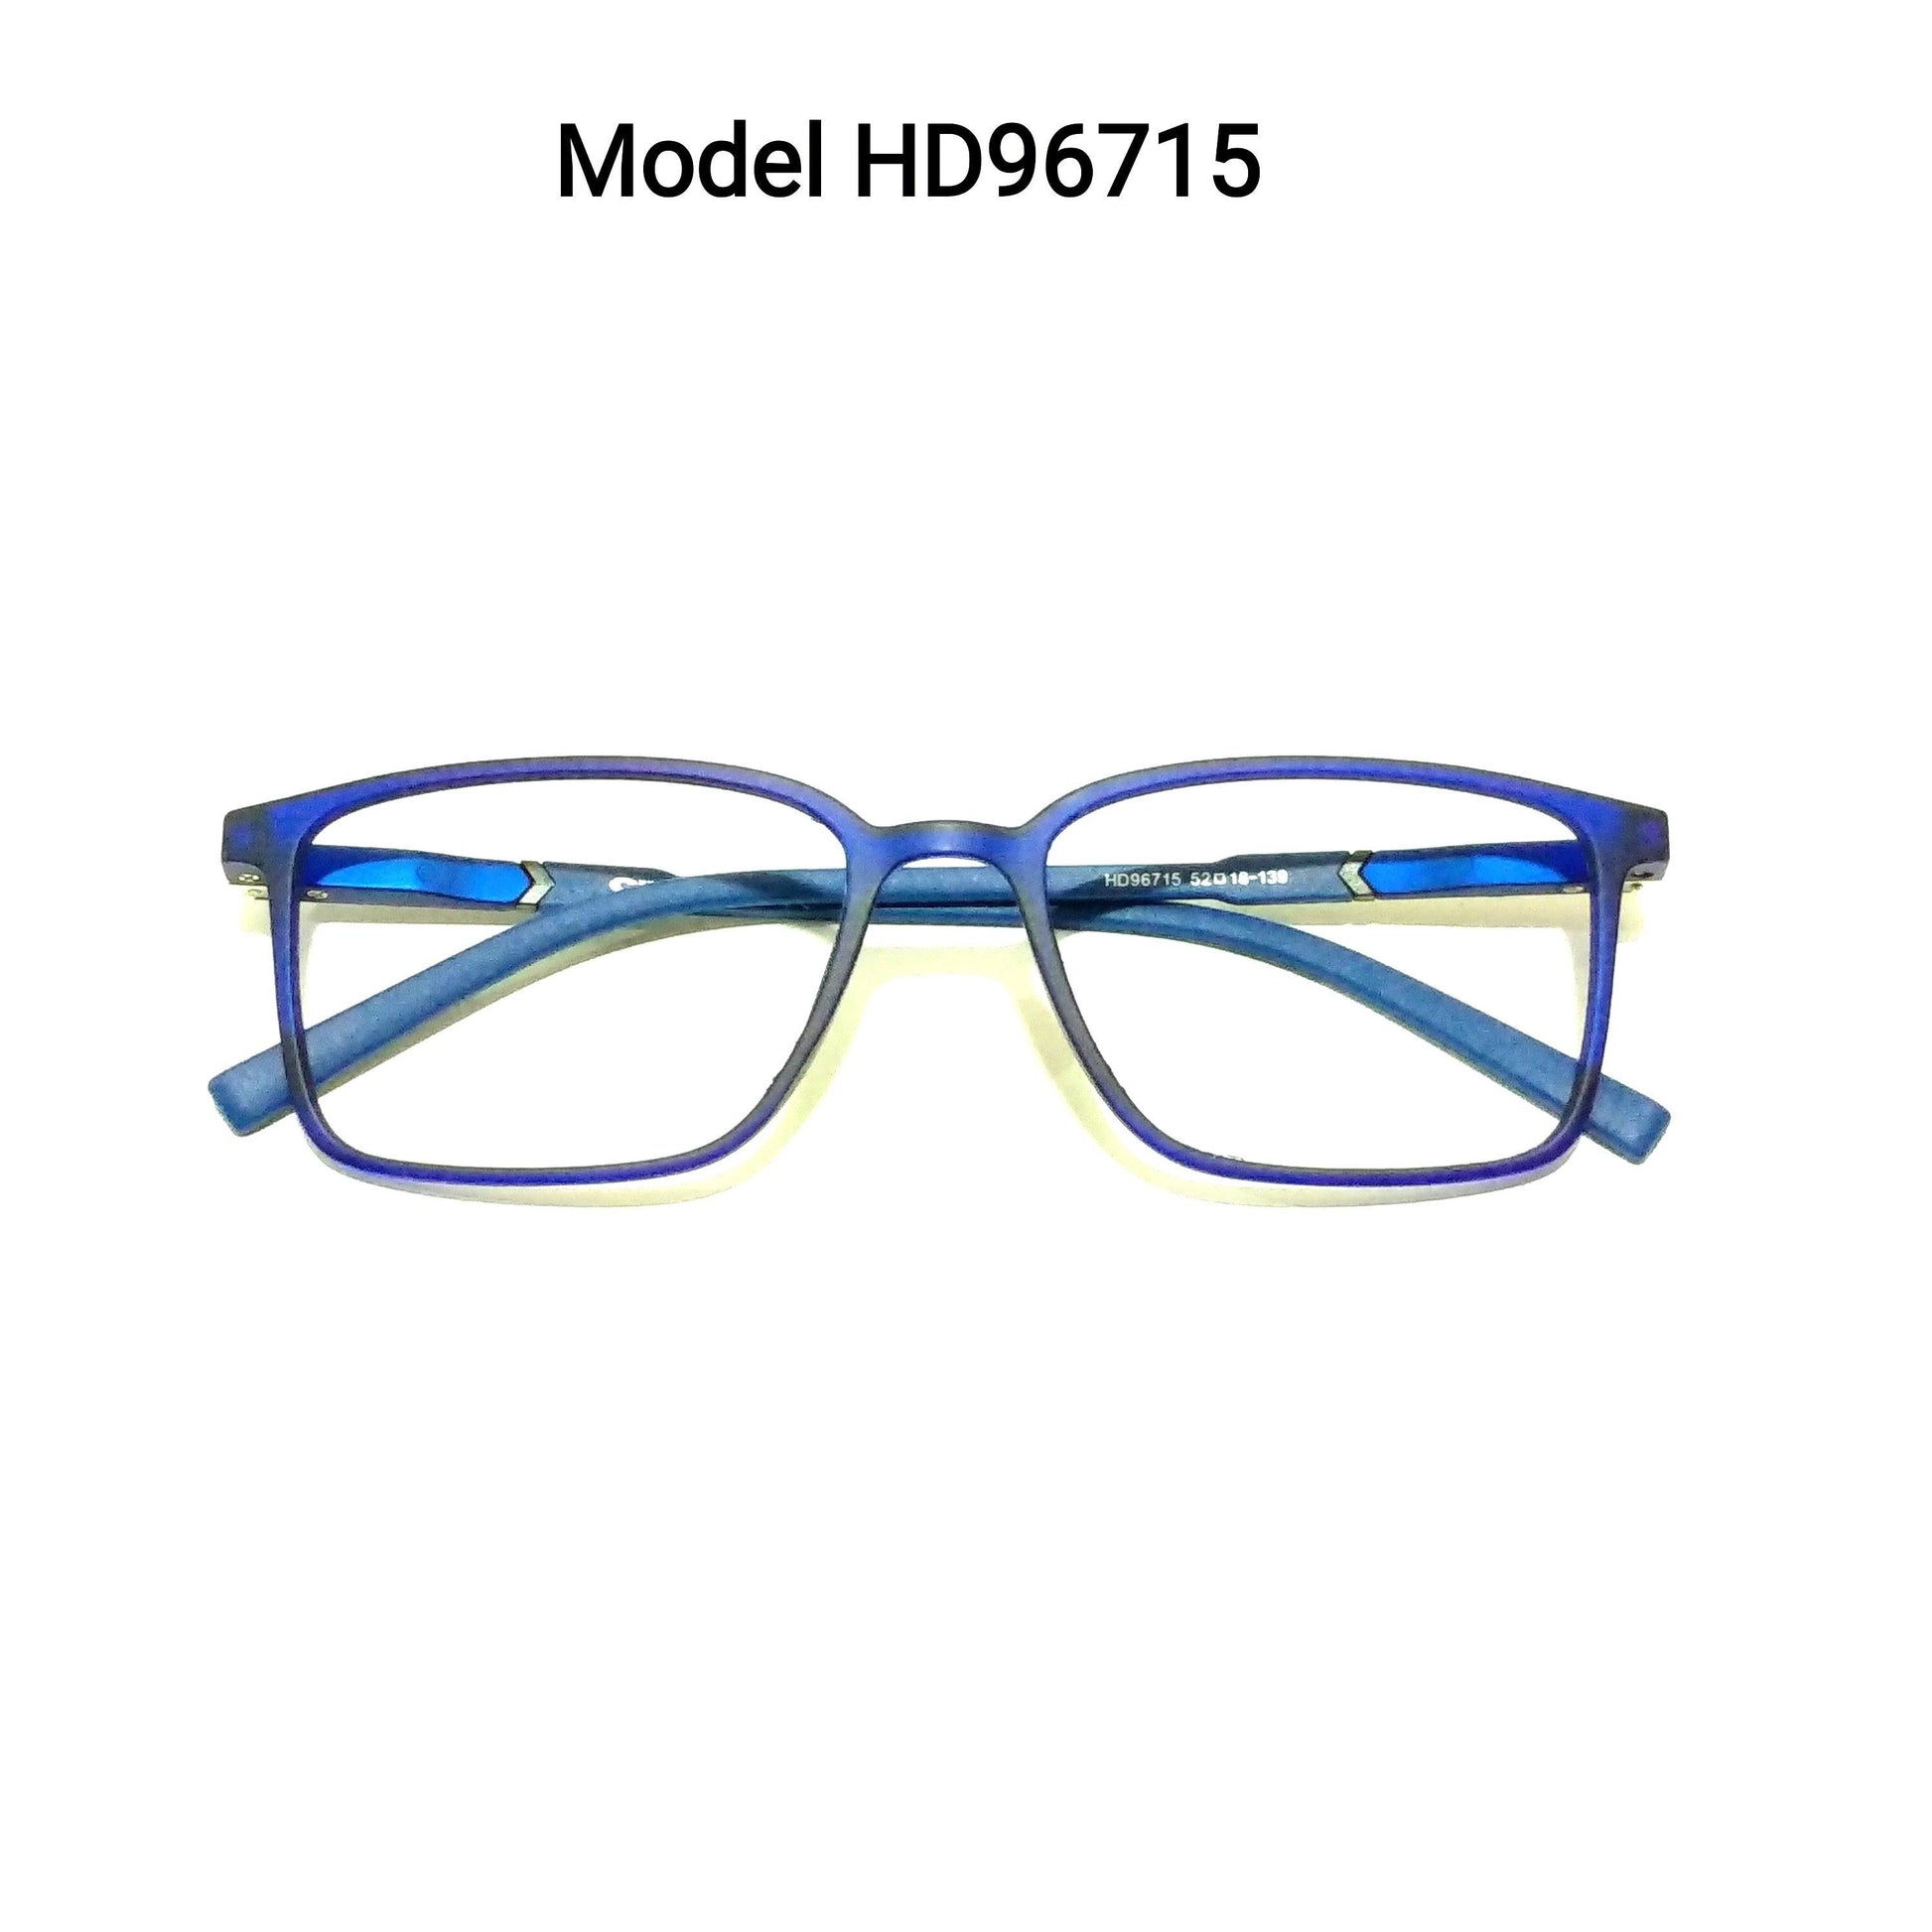 Buy Ultra Thin Lightweight TR90 Spectacle Frame Glasses for Men Women HD96715C6 - Glasses India Online in India